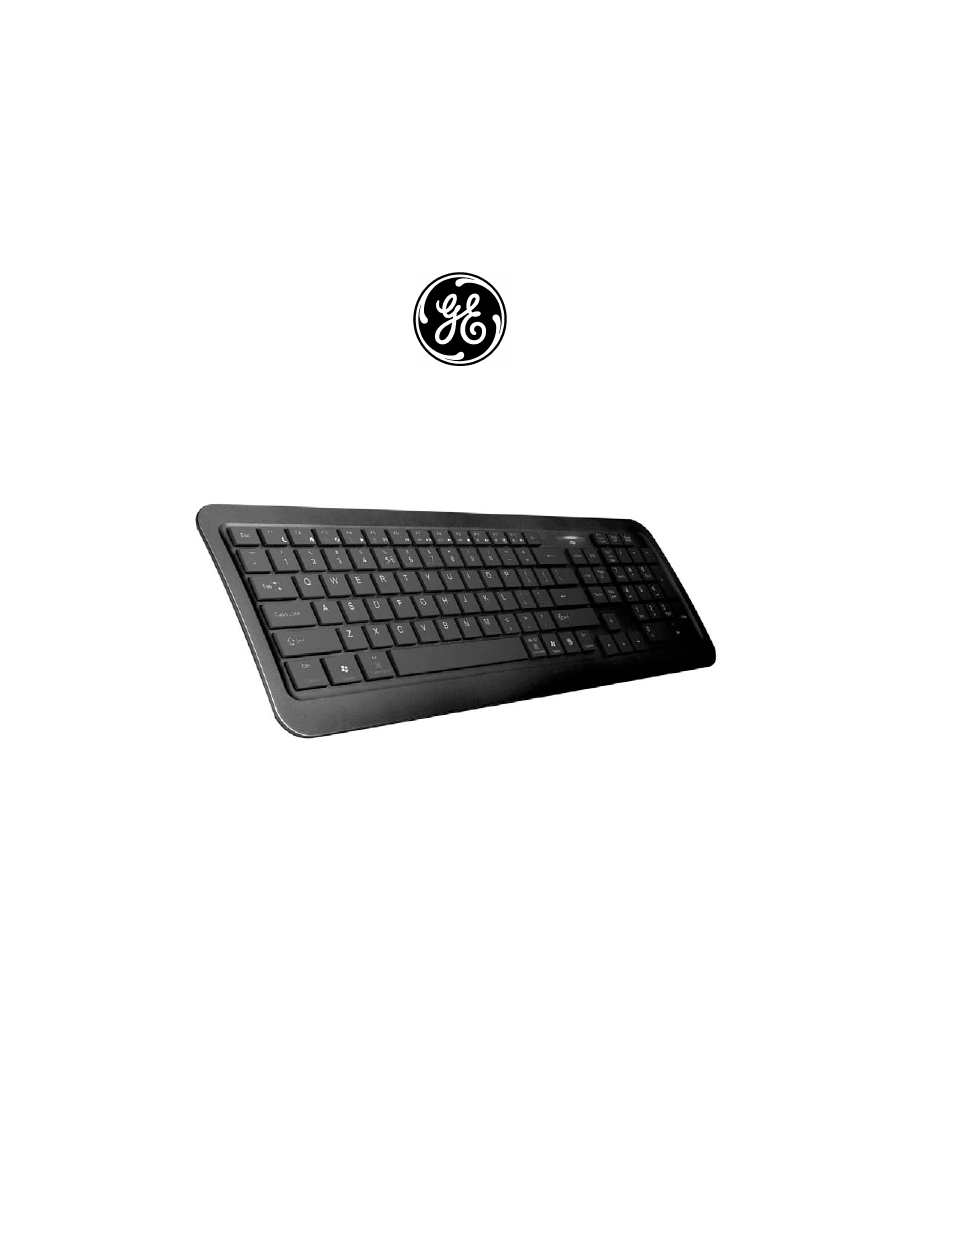 GE 98615 GE Wireless Thin-Profile Keyboard User Manual | 7 pages